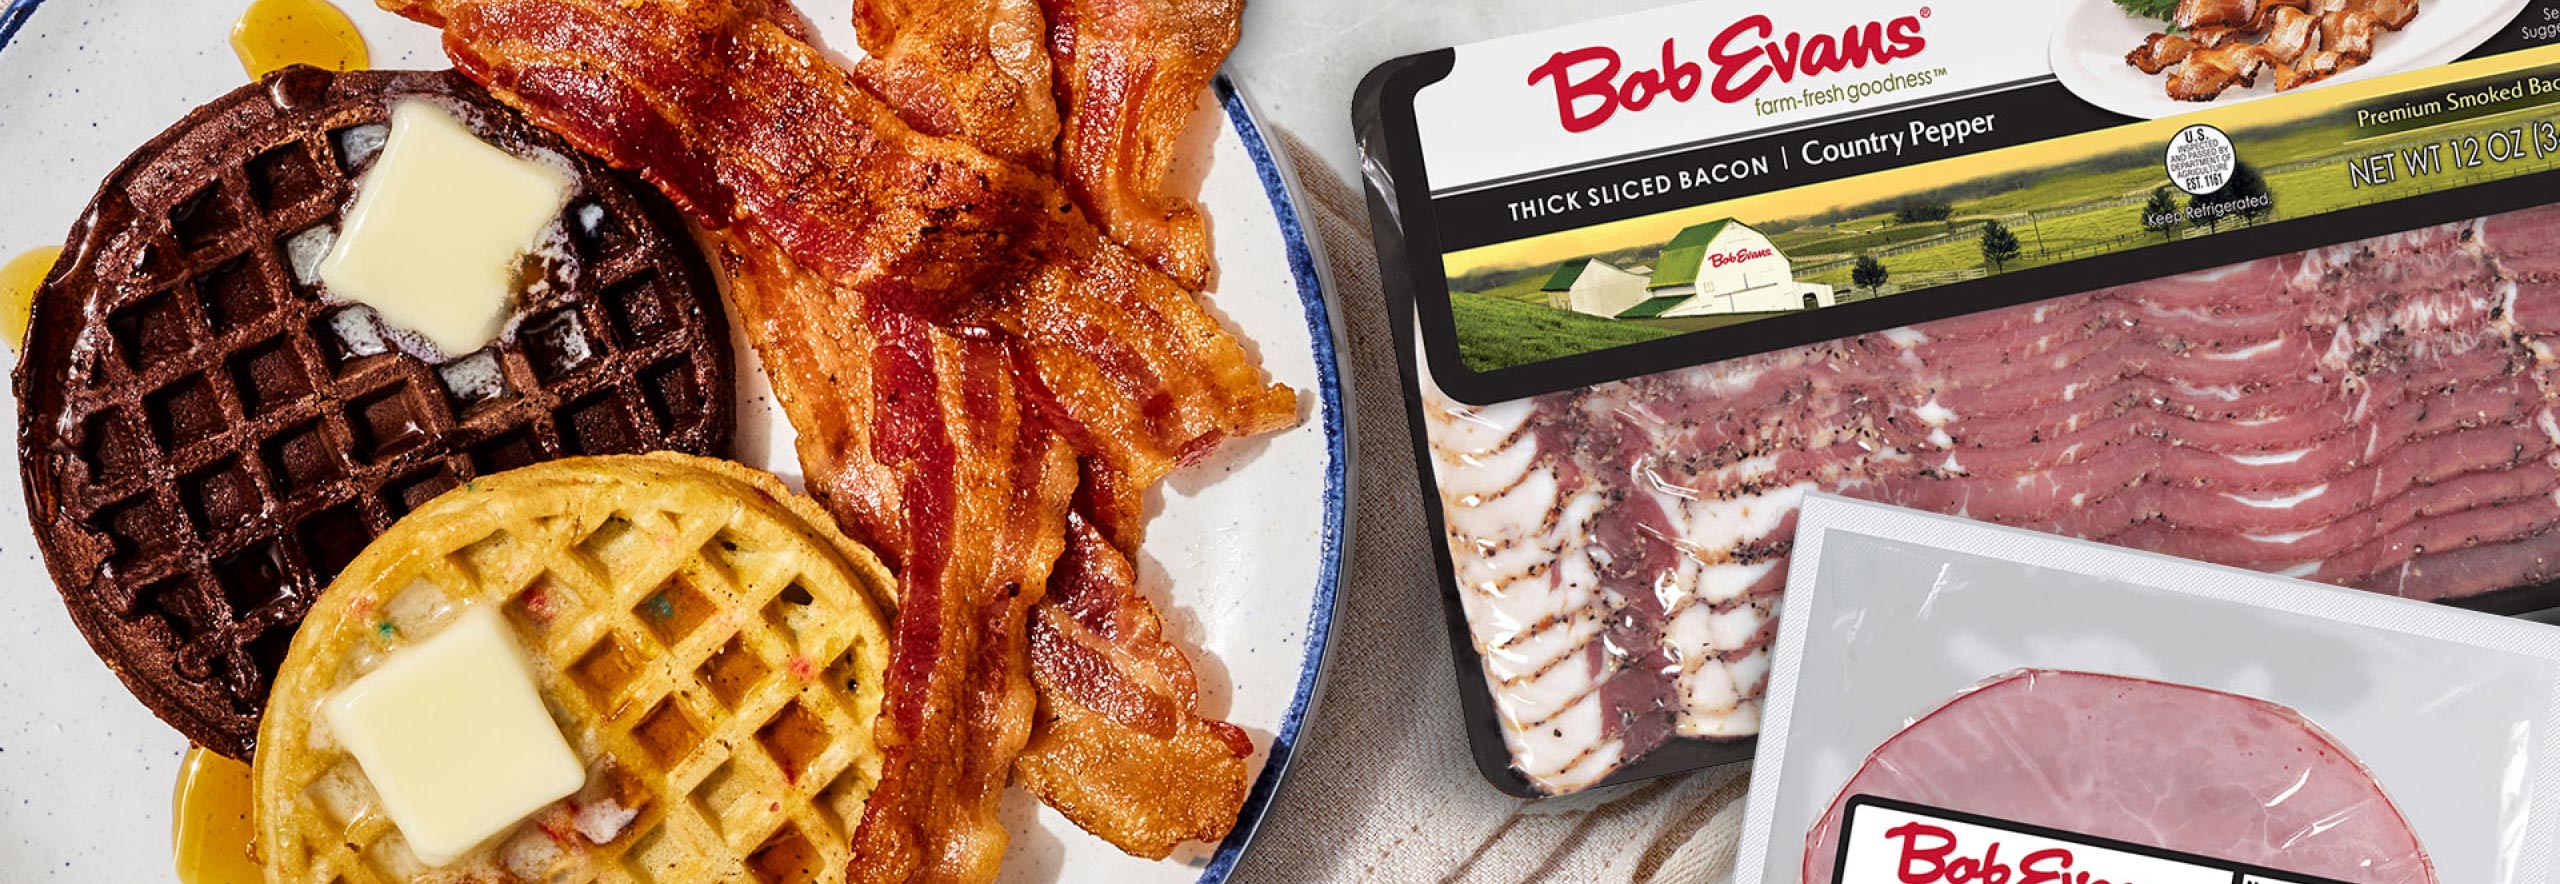 Photo of Bob Evans Country Pepper Thick Sliced Bacon